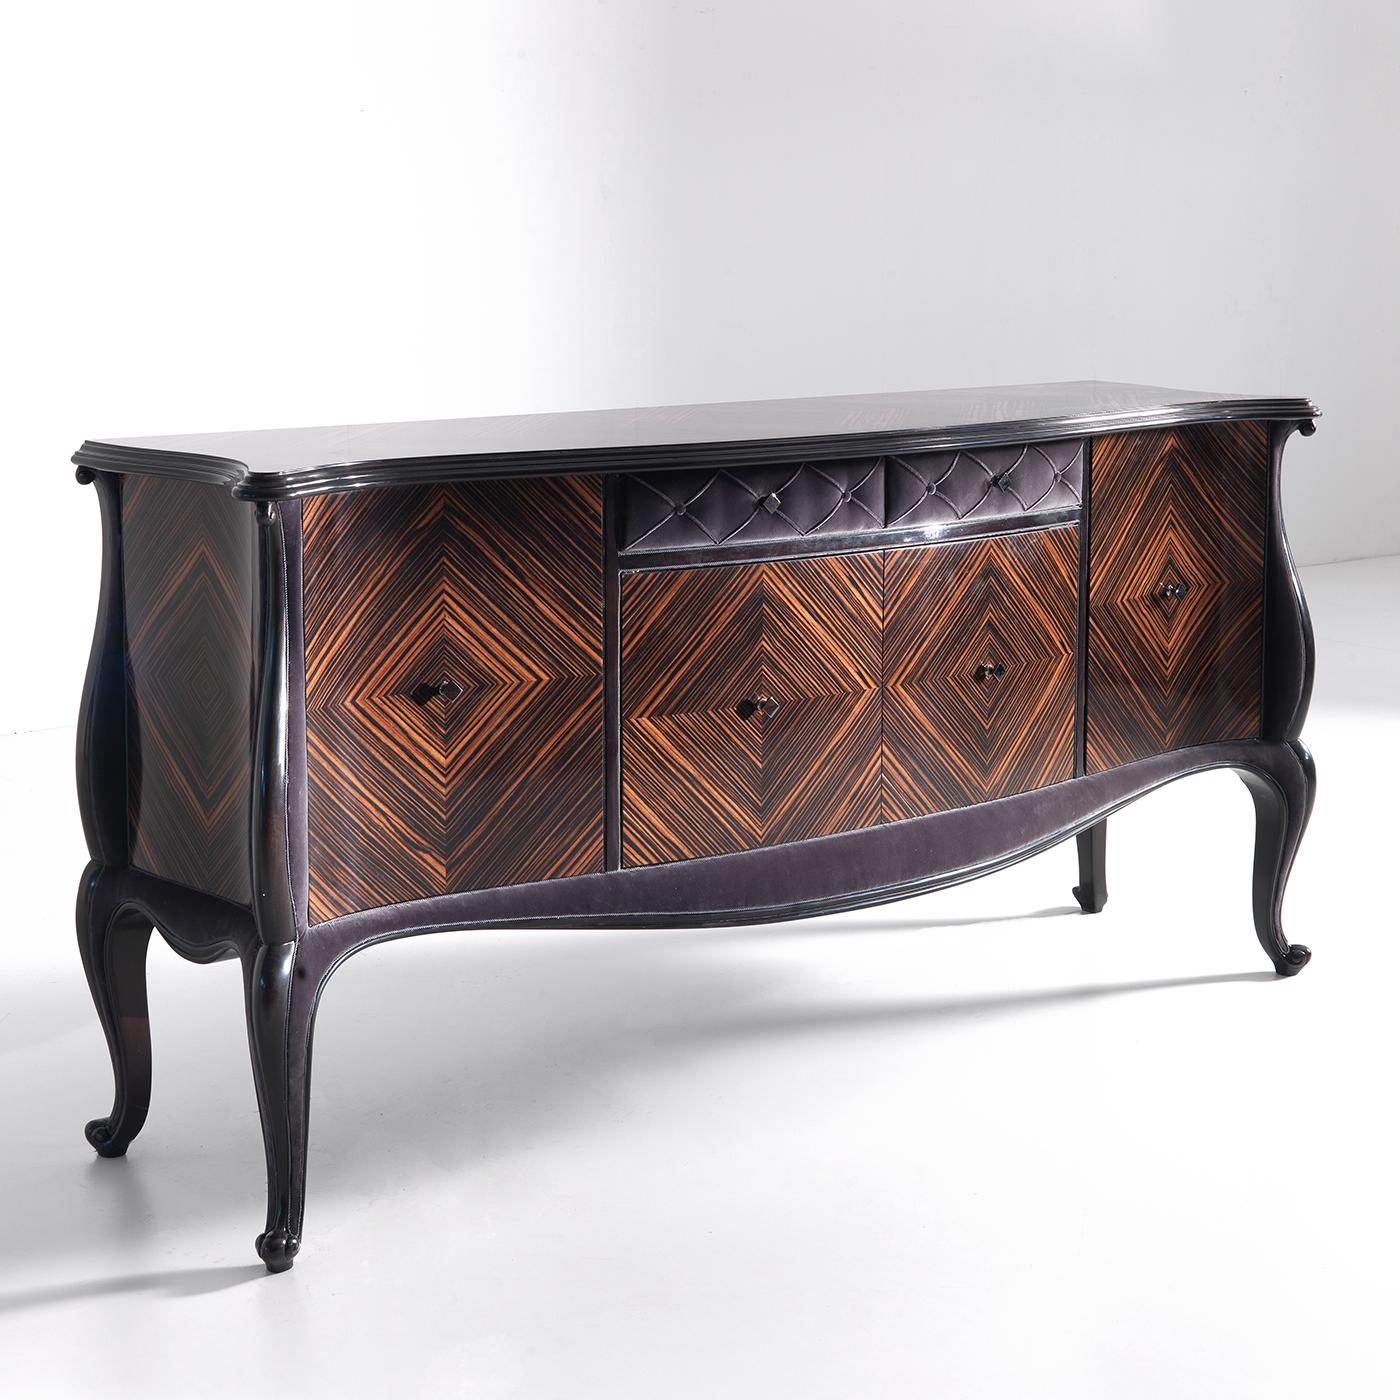 A celebration of Makassar ebony's undeniable elegance, this classic-inspired sideboard will provide invaluable storage space for different needs. Crafted of Makassar ebony enriched with fascinating velvet inserts, the piece stands out for the